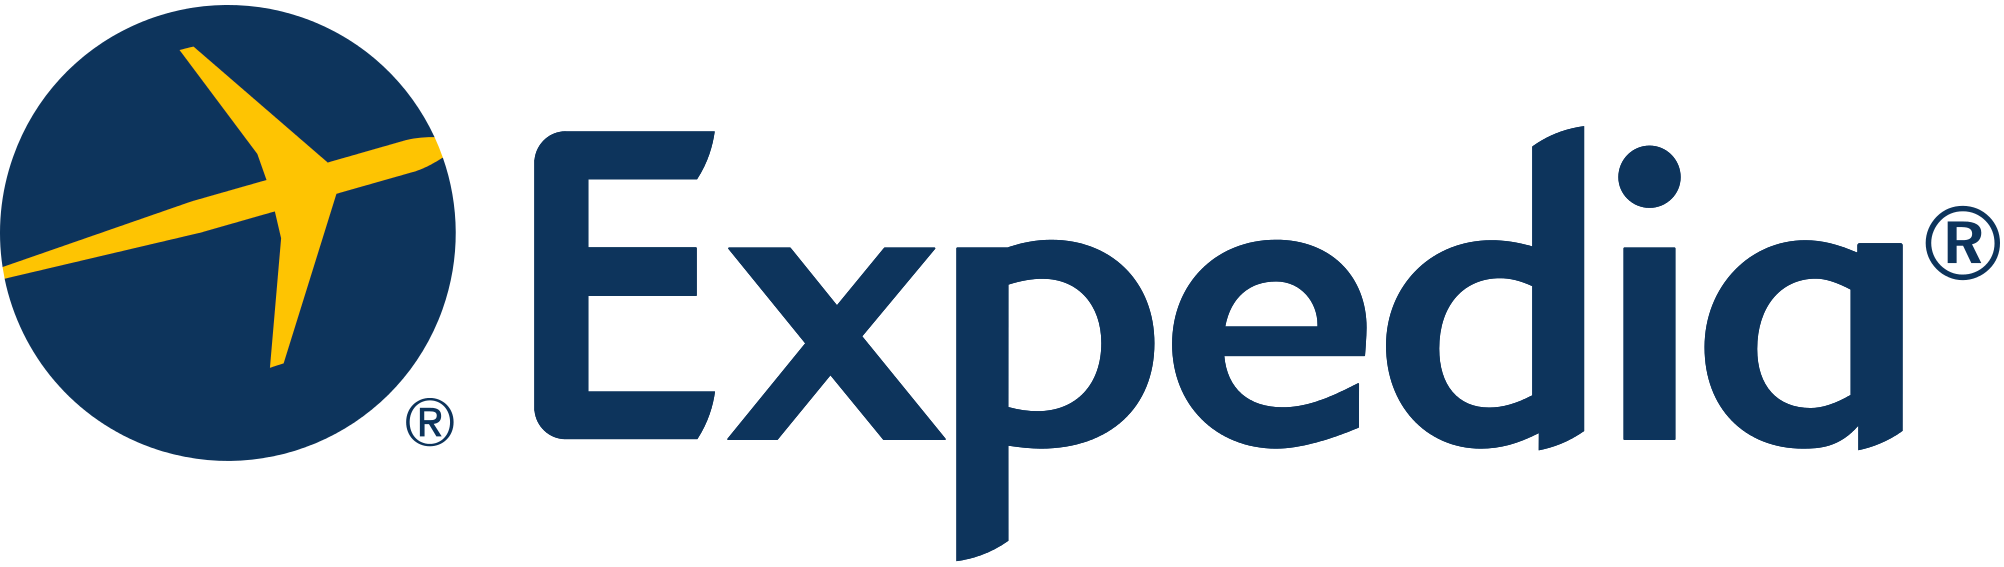 Expedia-logo-and-wordmark low res.png